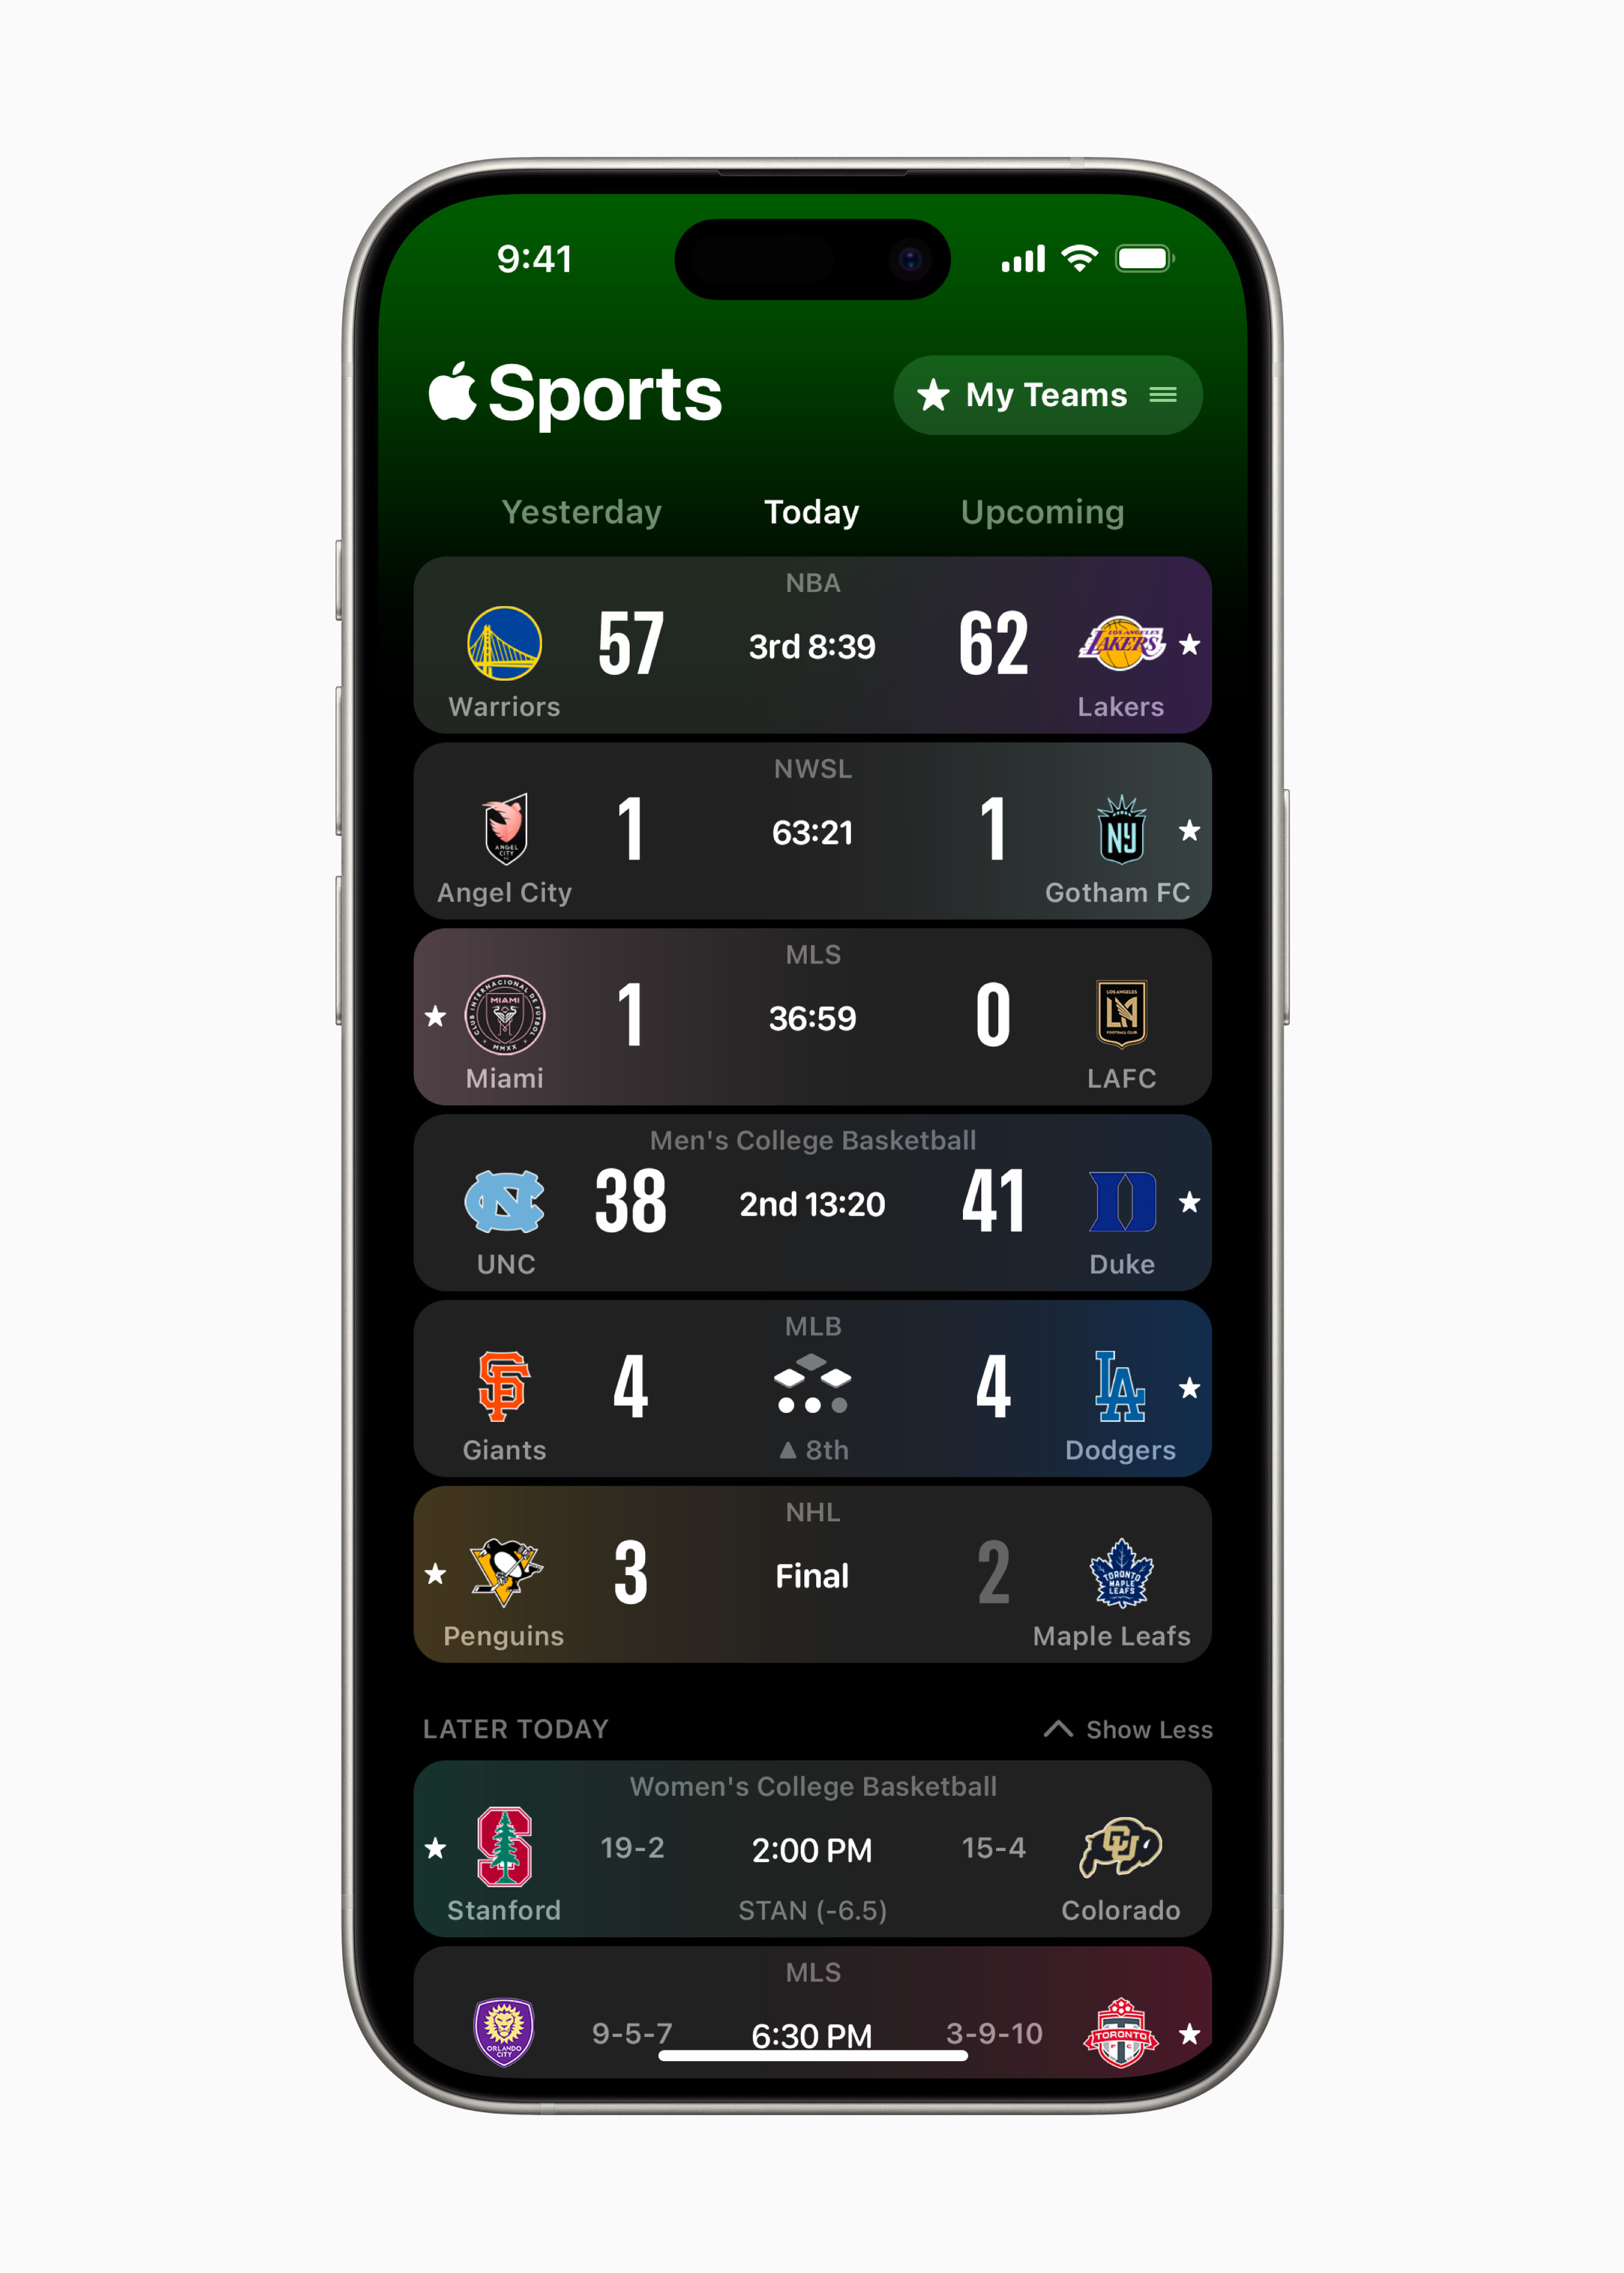 The My Teams page within Apple Sports, showing a list of upcoming games. At the top, the words Yesterday and Upcoming are dimmed, while the word Today is bright and selected. A bit of the green background bleeds through the labels.